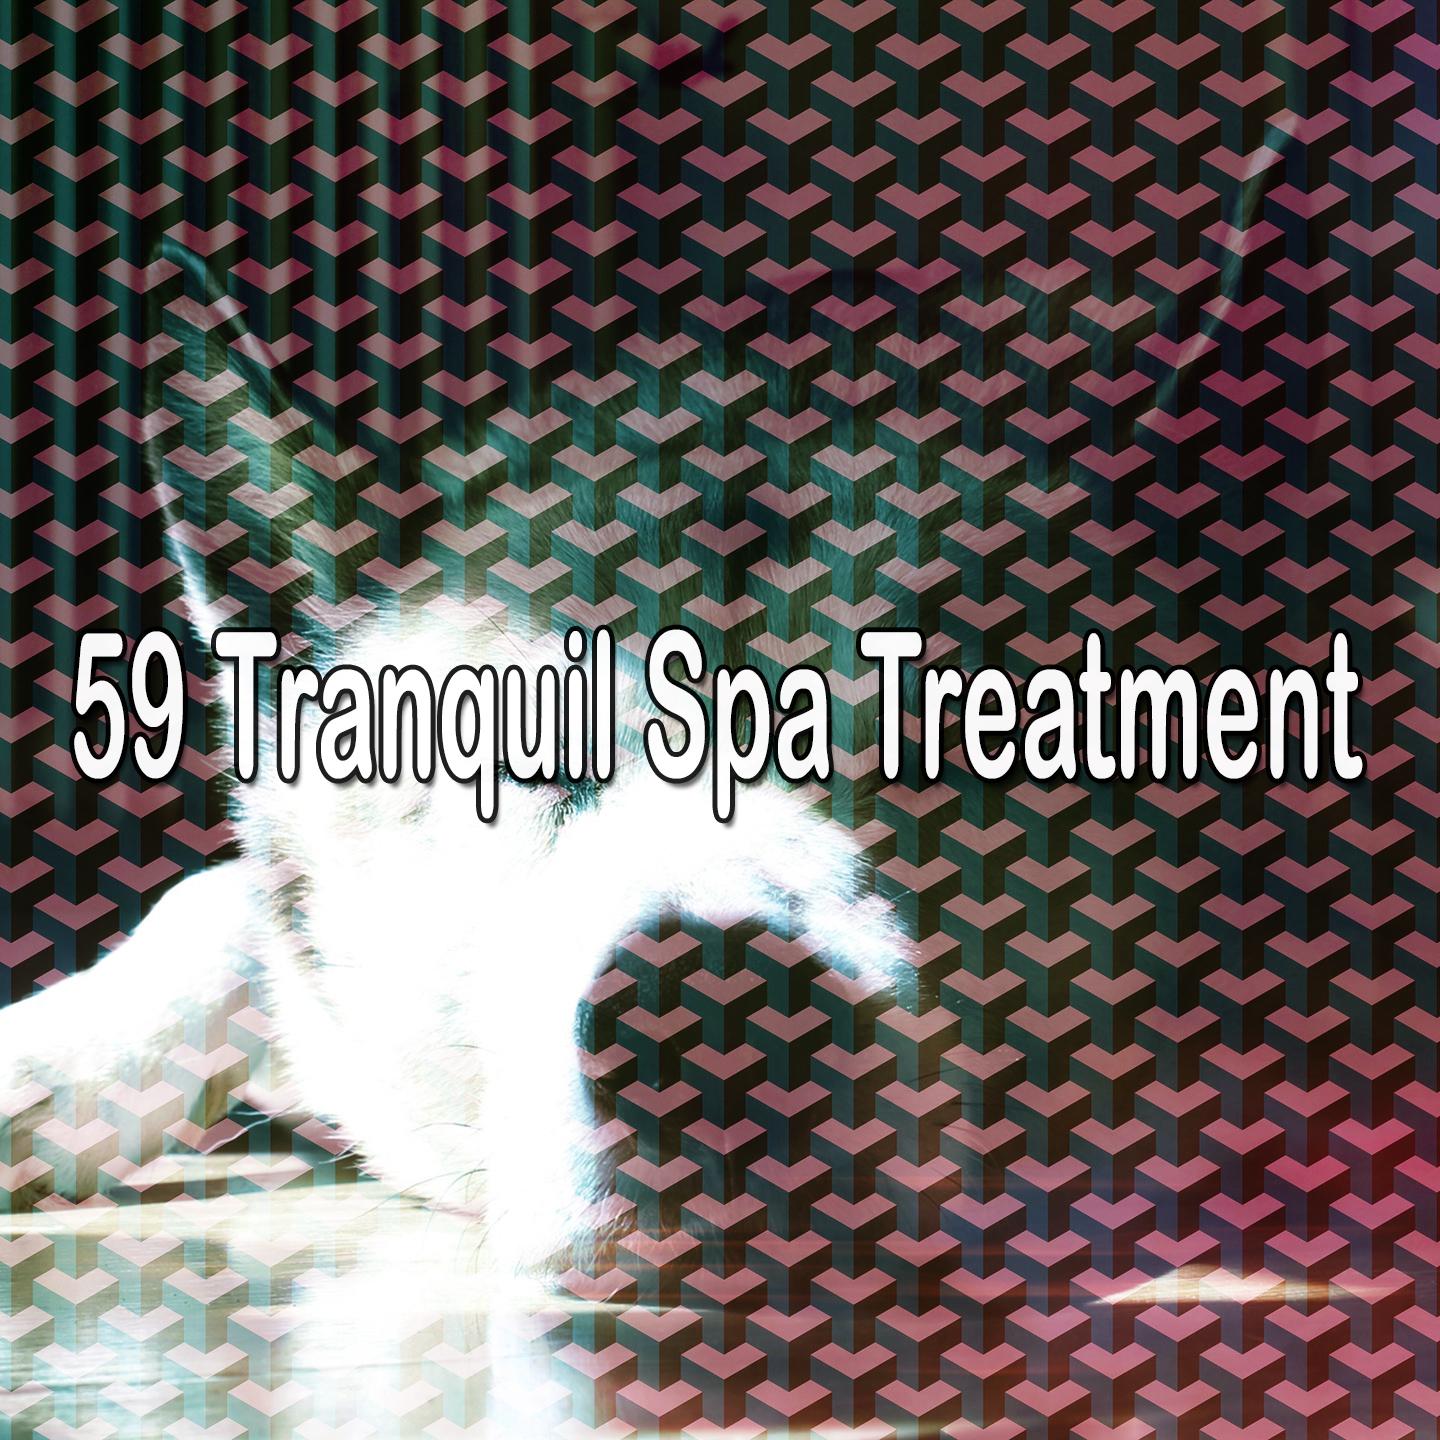 59 Tranquil Spa Treatment